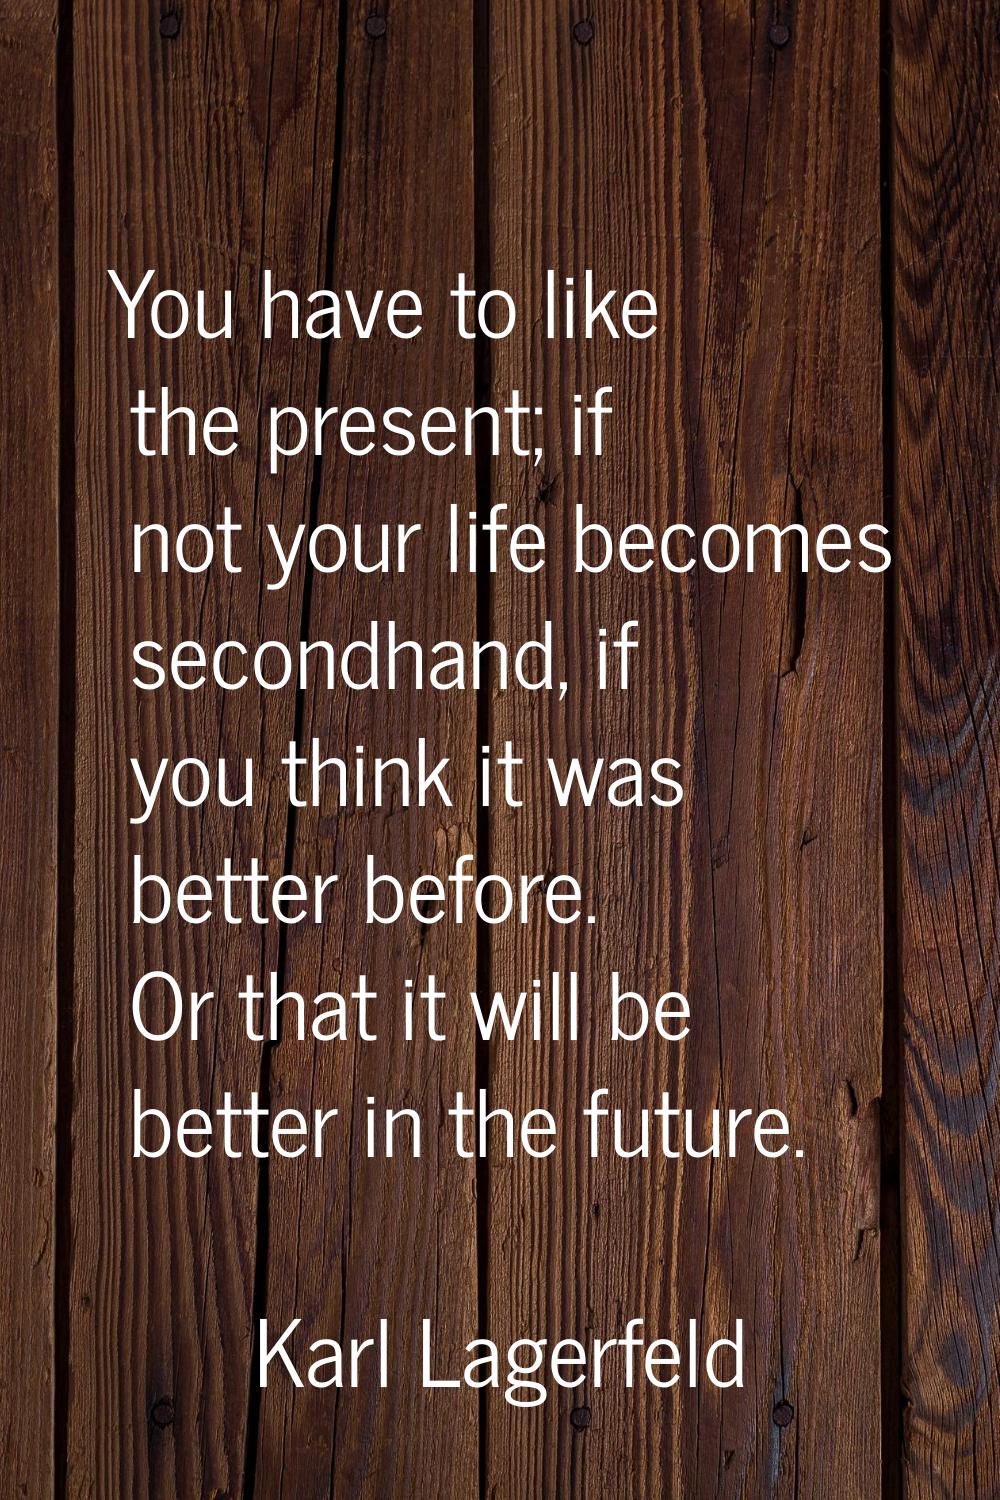 You have to like the present; if not your life becomes secondhand, if you think it was better befor